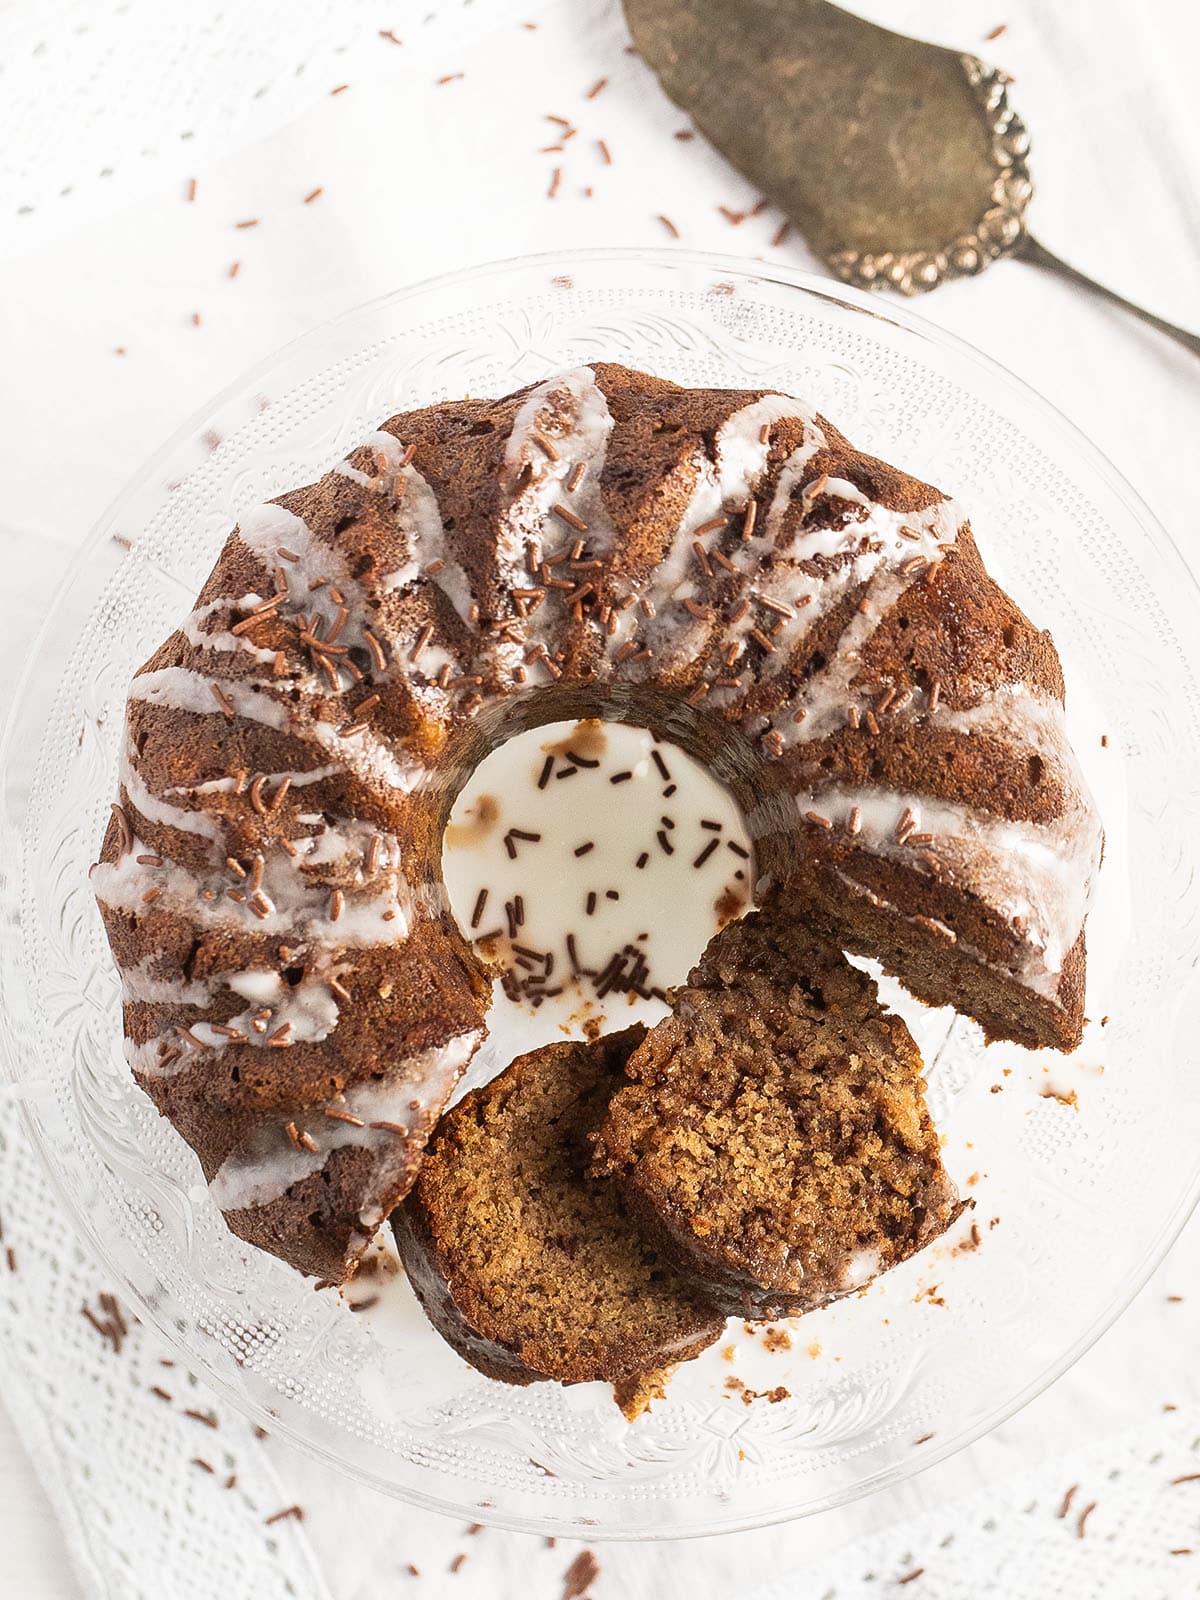 overhead view of a bundt cake with bananas and chocolate chips.